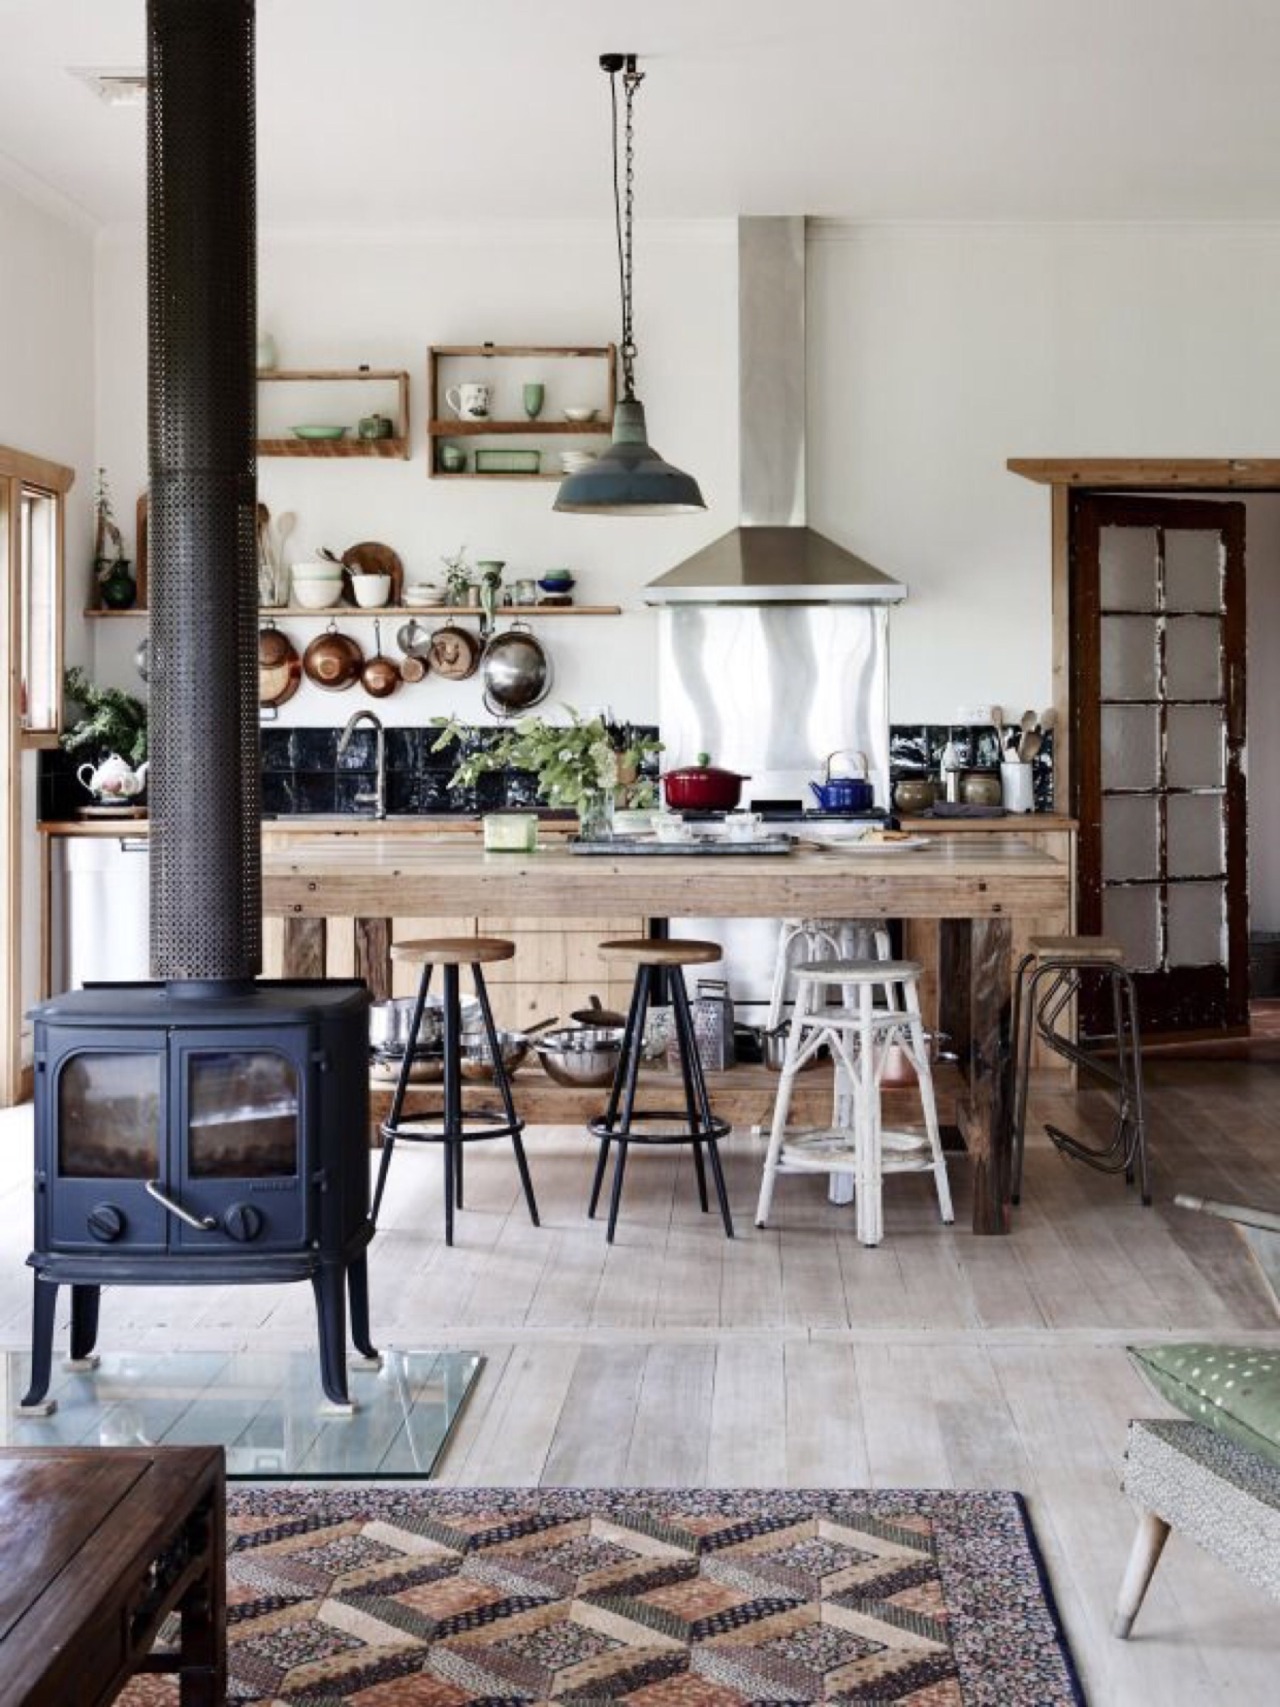 Country rustic kitchen islands